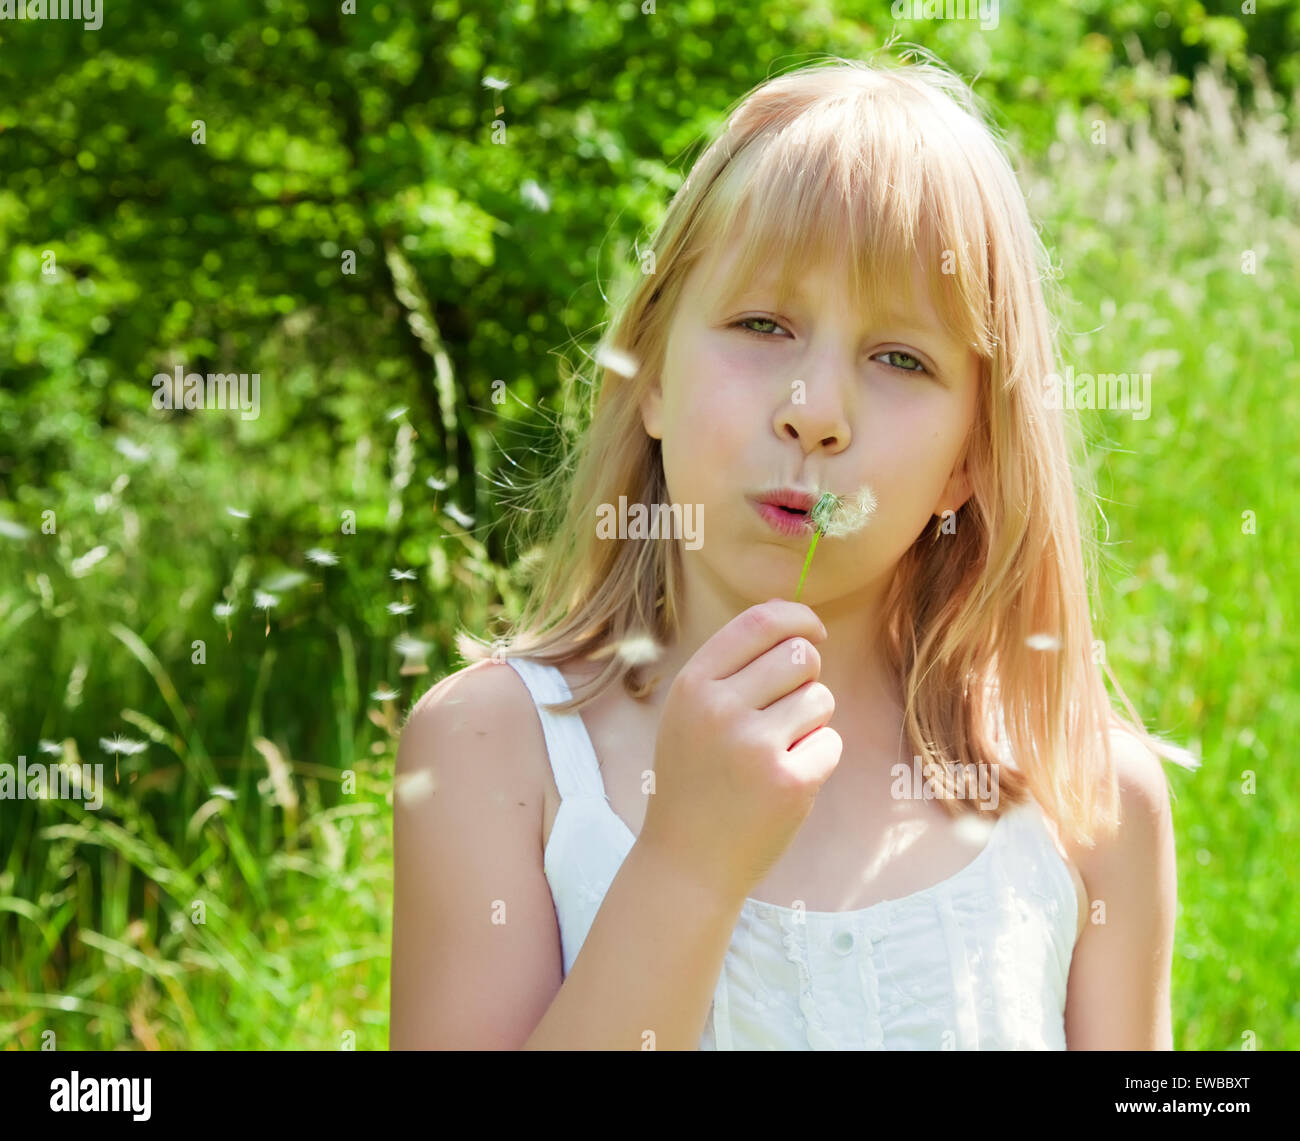 young girl blowing on a dandelion Stock Photo